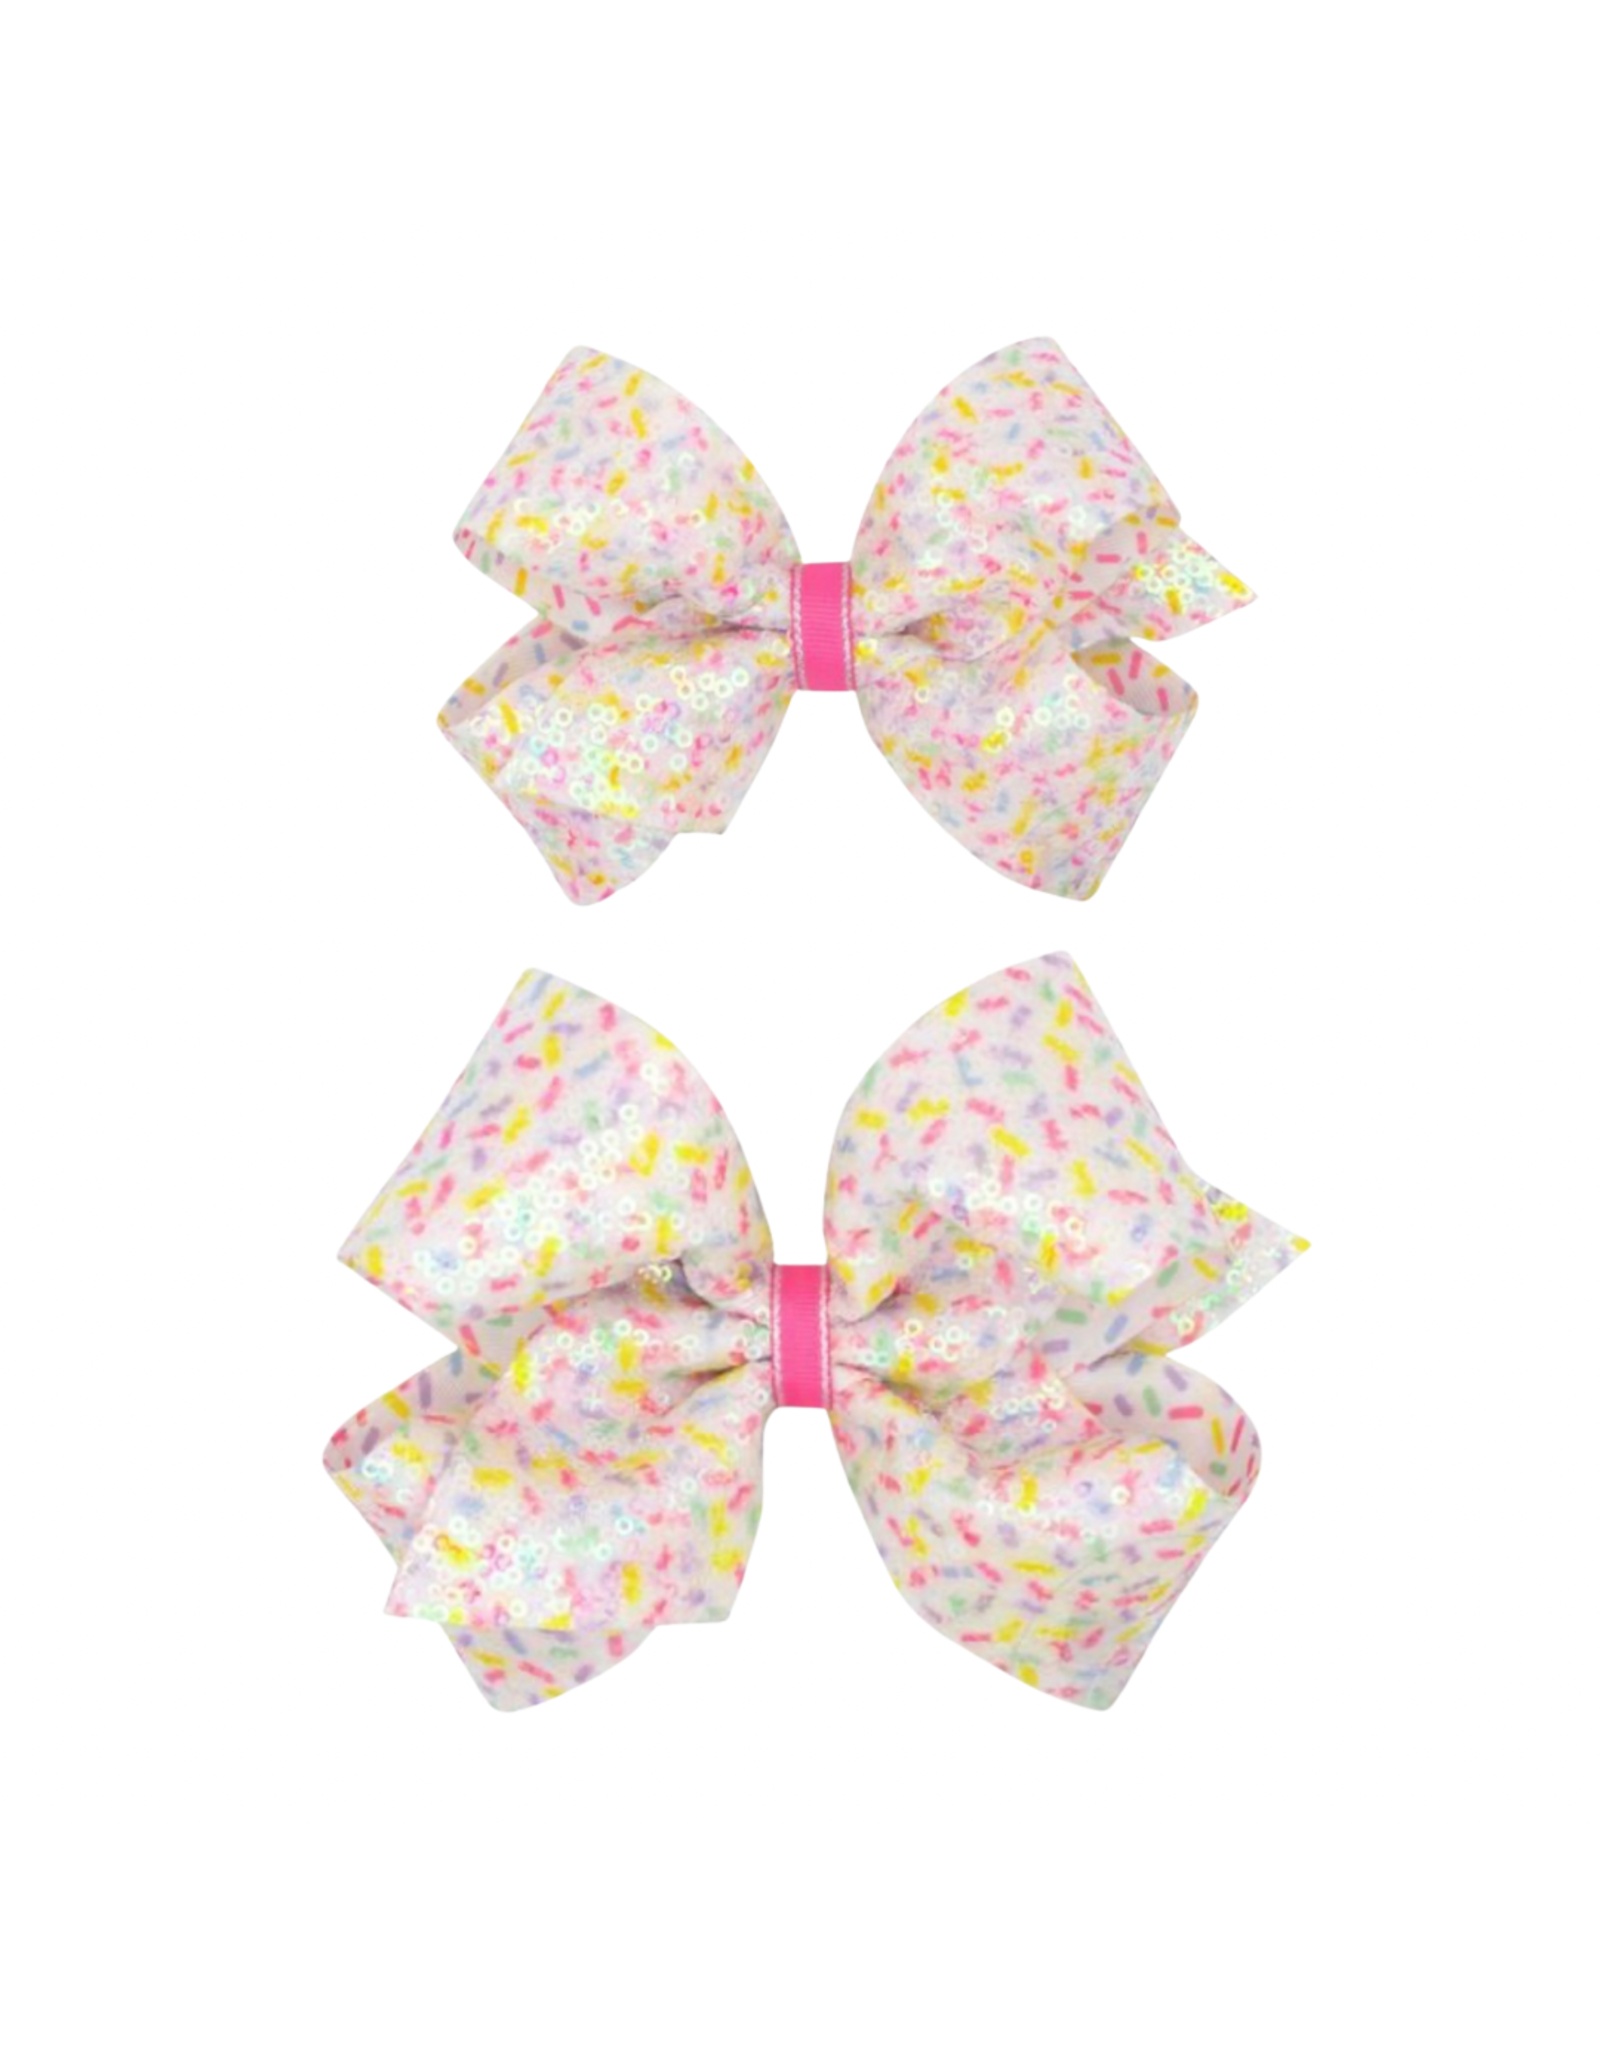 Wee Ones- Colorful Confetti Printed Sequin Bow